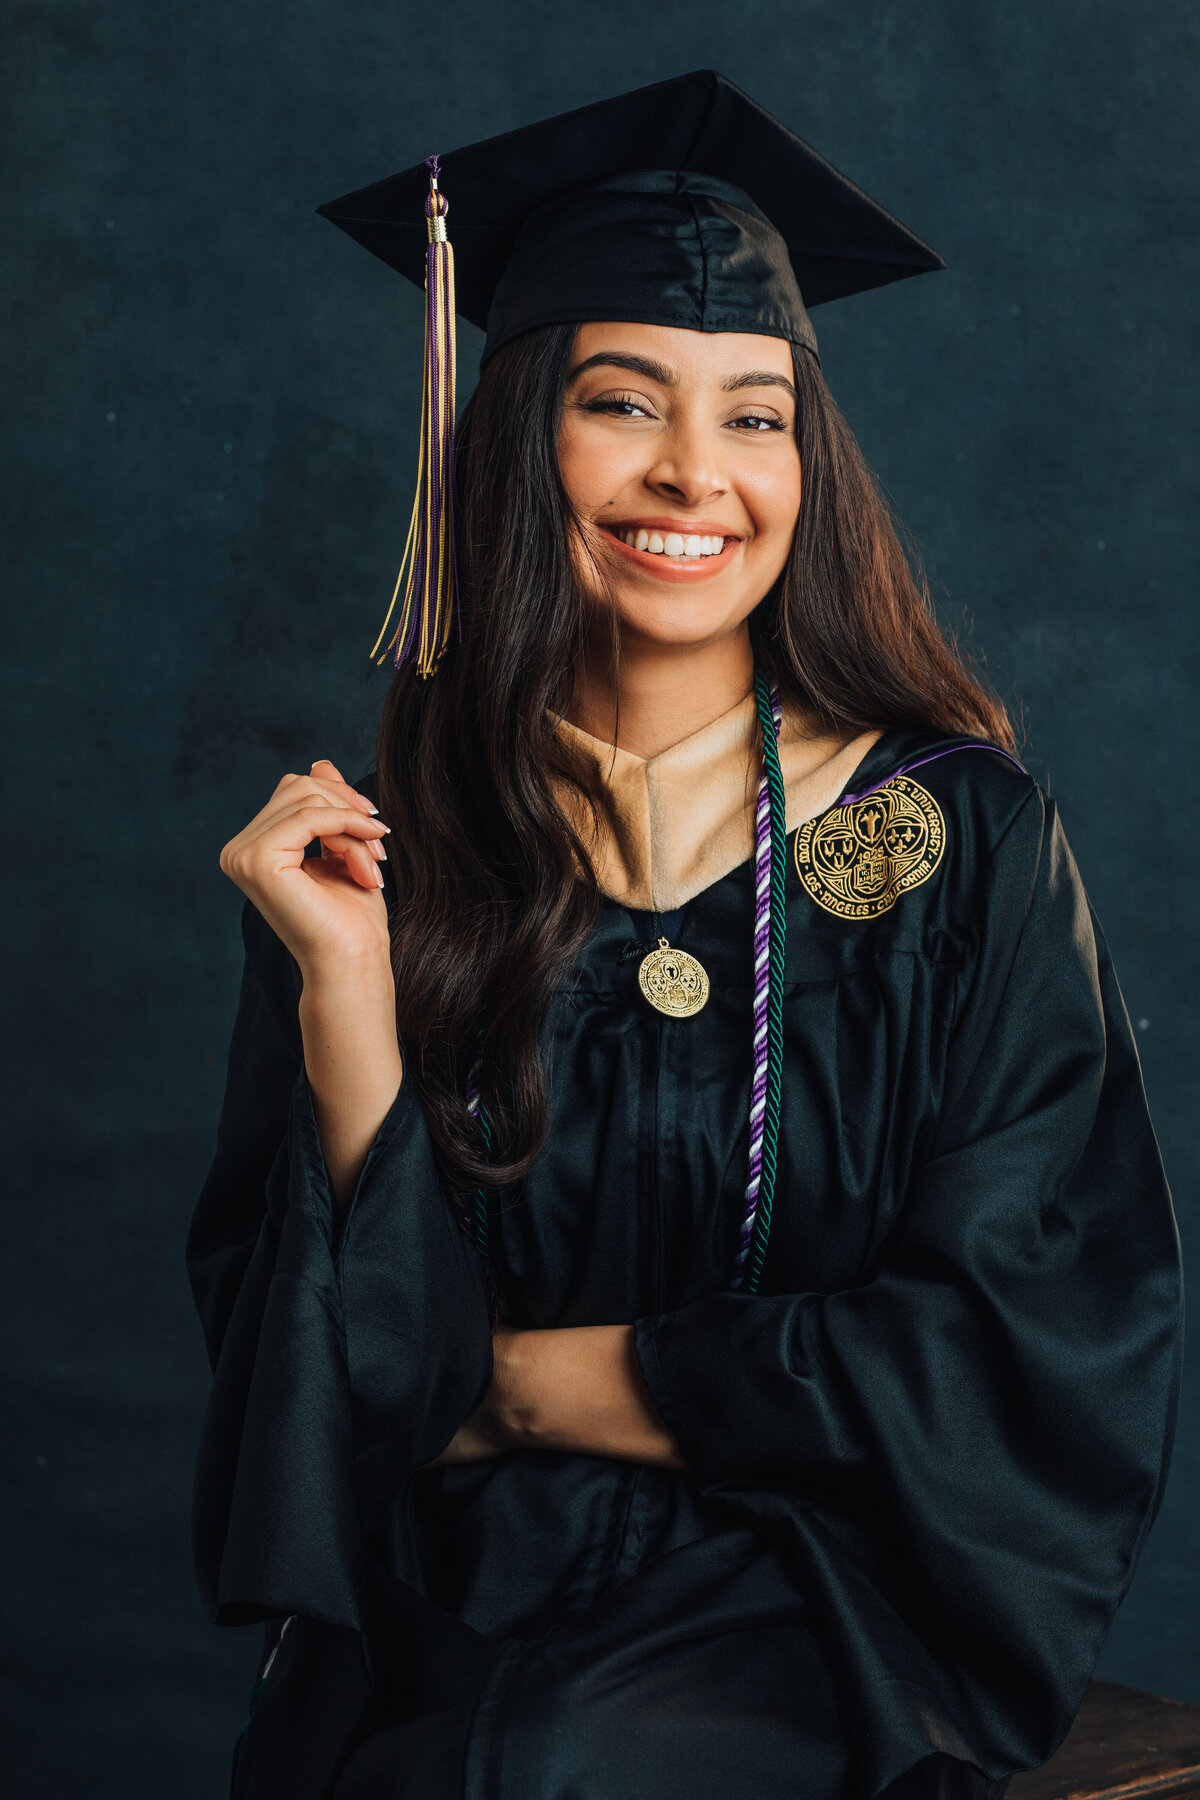 Graduation Portrait Of Young Woman In Black Toga Smiling Los Angeles